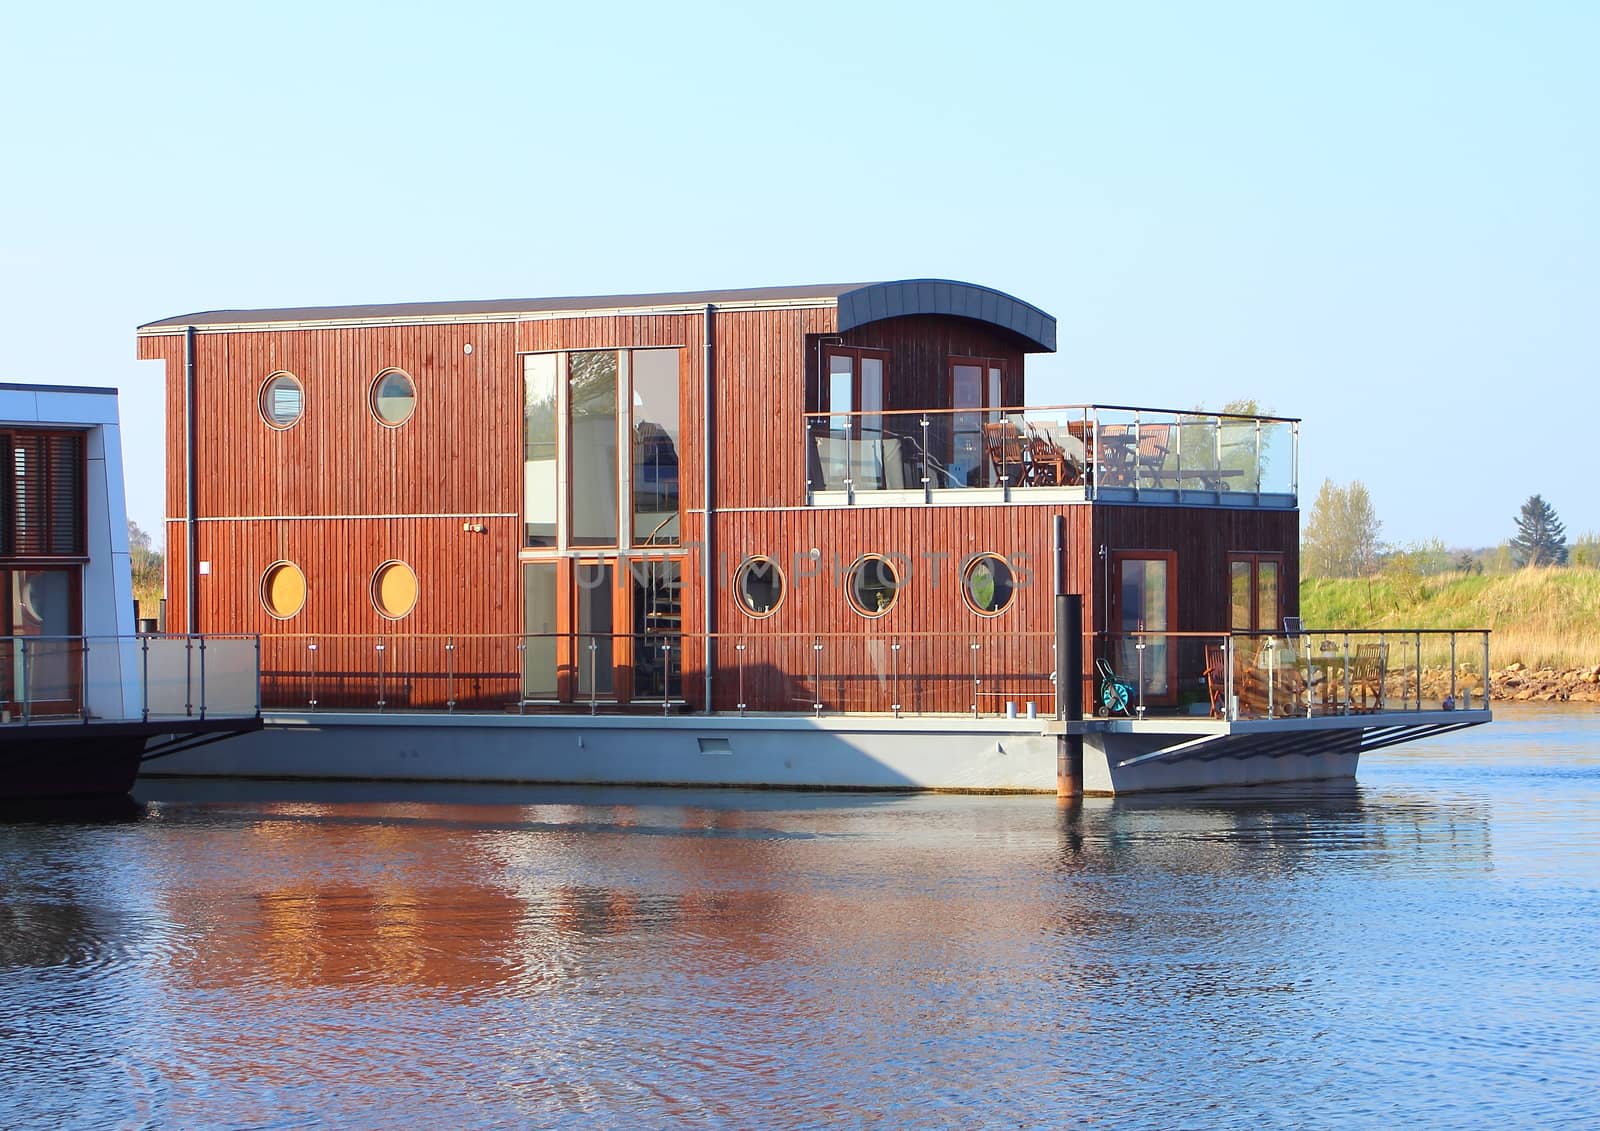 Wooden houseboat with two floors in lake by HoleInTheBox